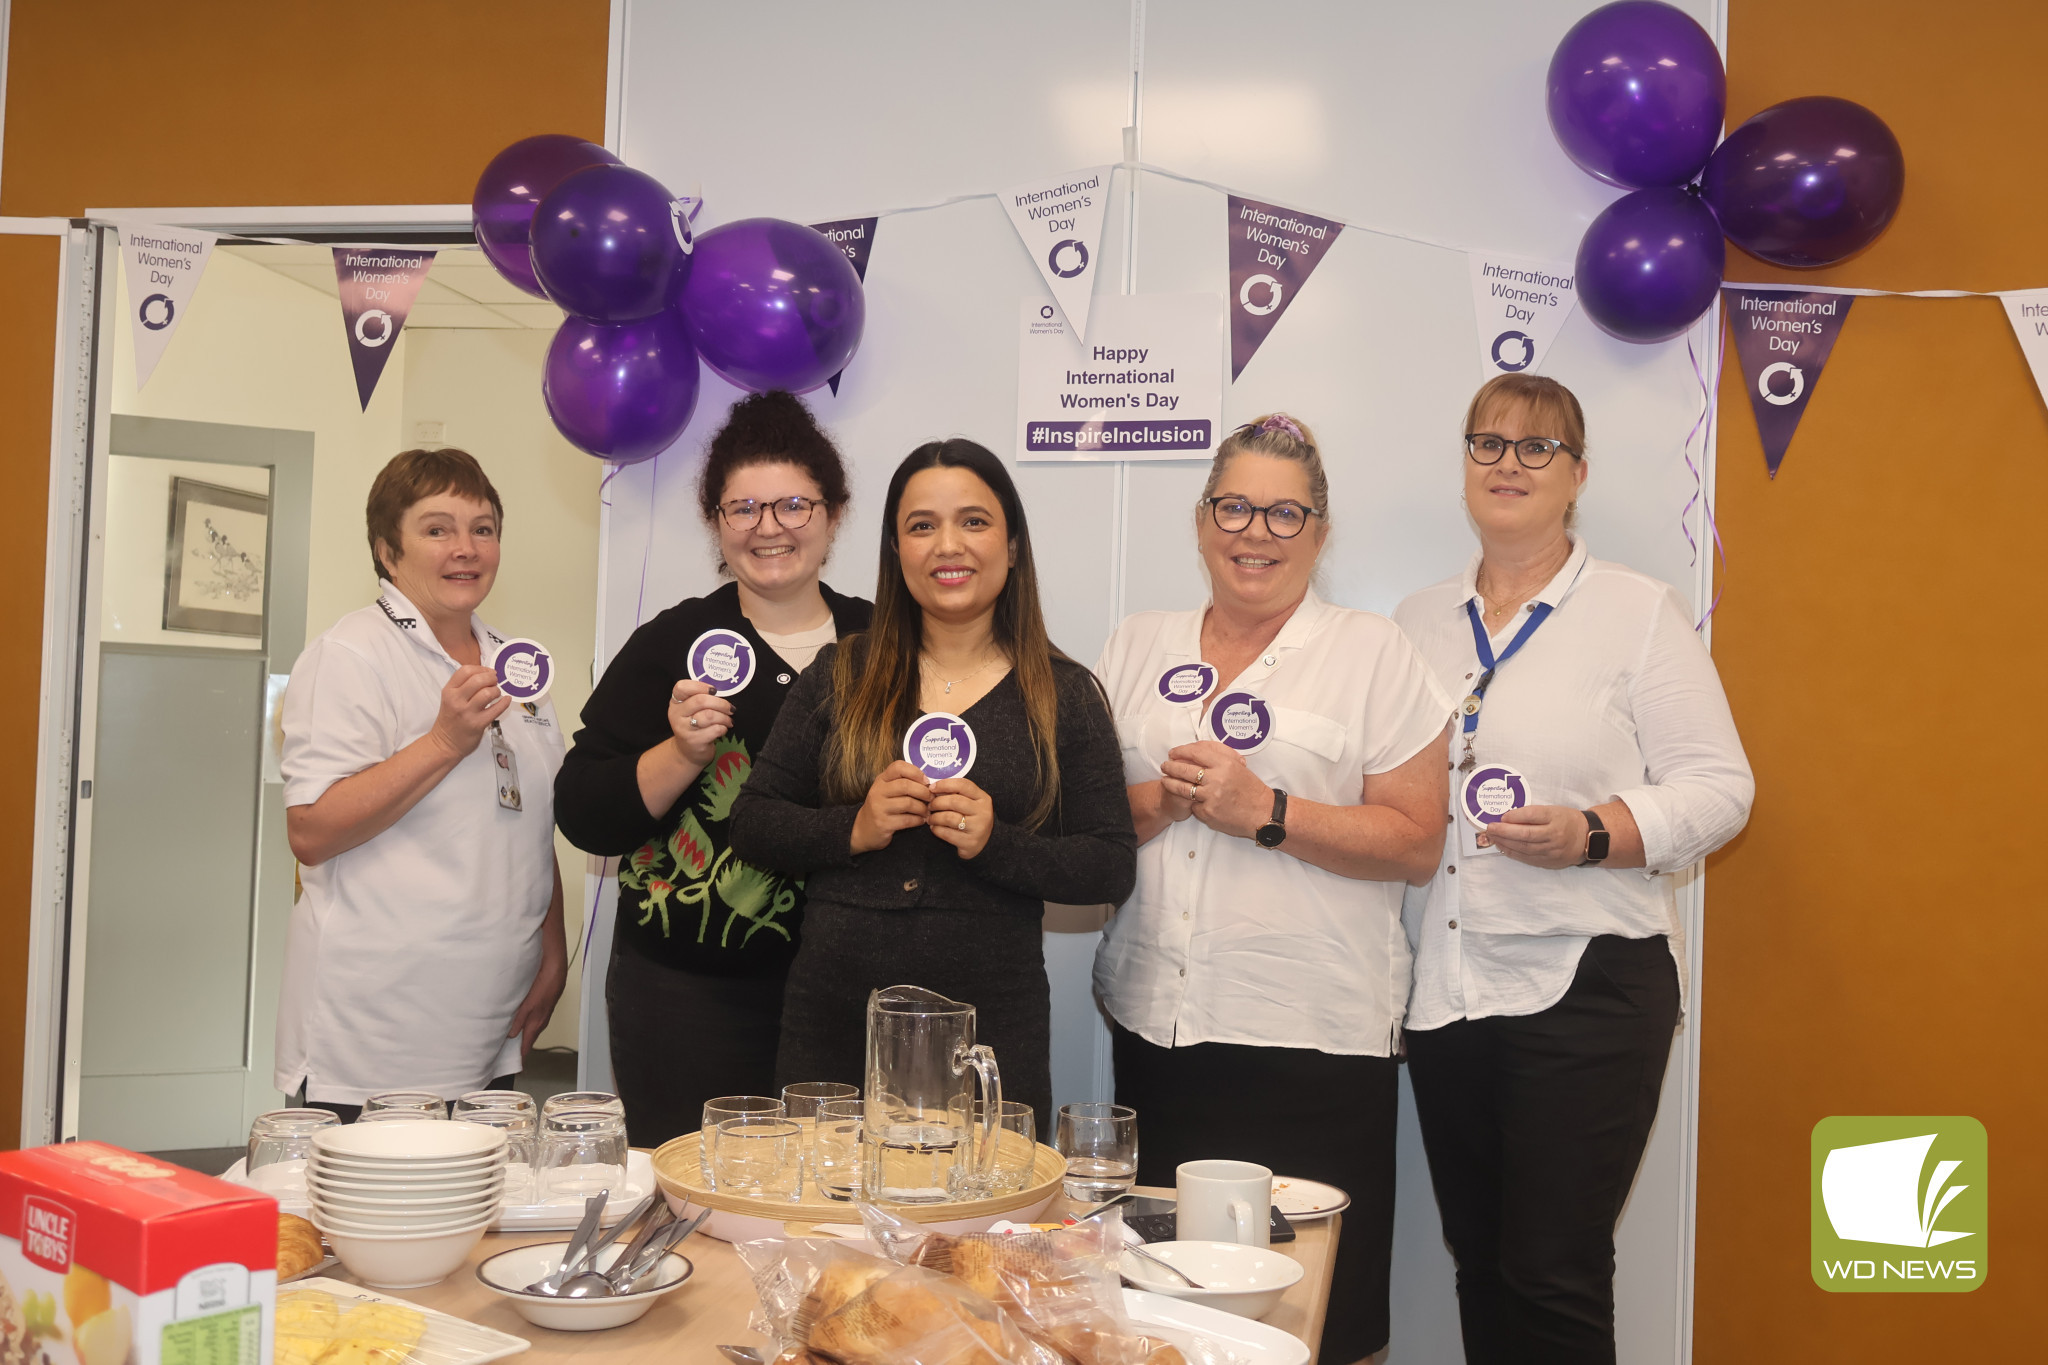 Inspire inclusion: Terang and Mortlake Health Service was among those who hosted a celebration for International Women’s Day last Friday. Among those in attendance was a guest speaker who shared the details of her upbringing in Nepal, and the dedication for health care which has seen her arrive in the south west as a nurse.